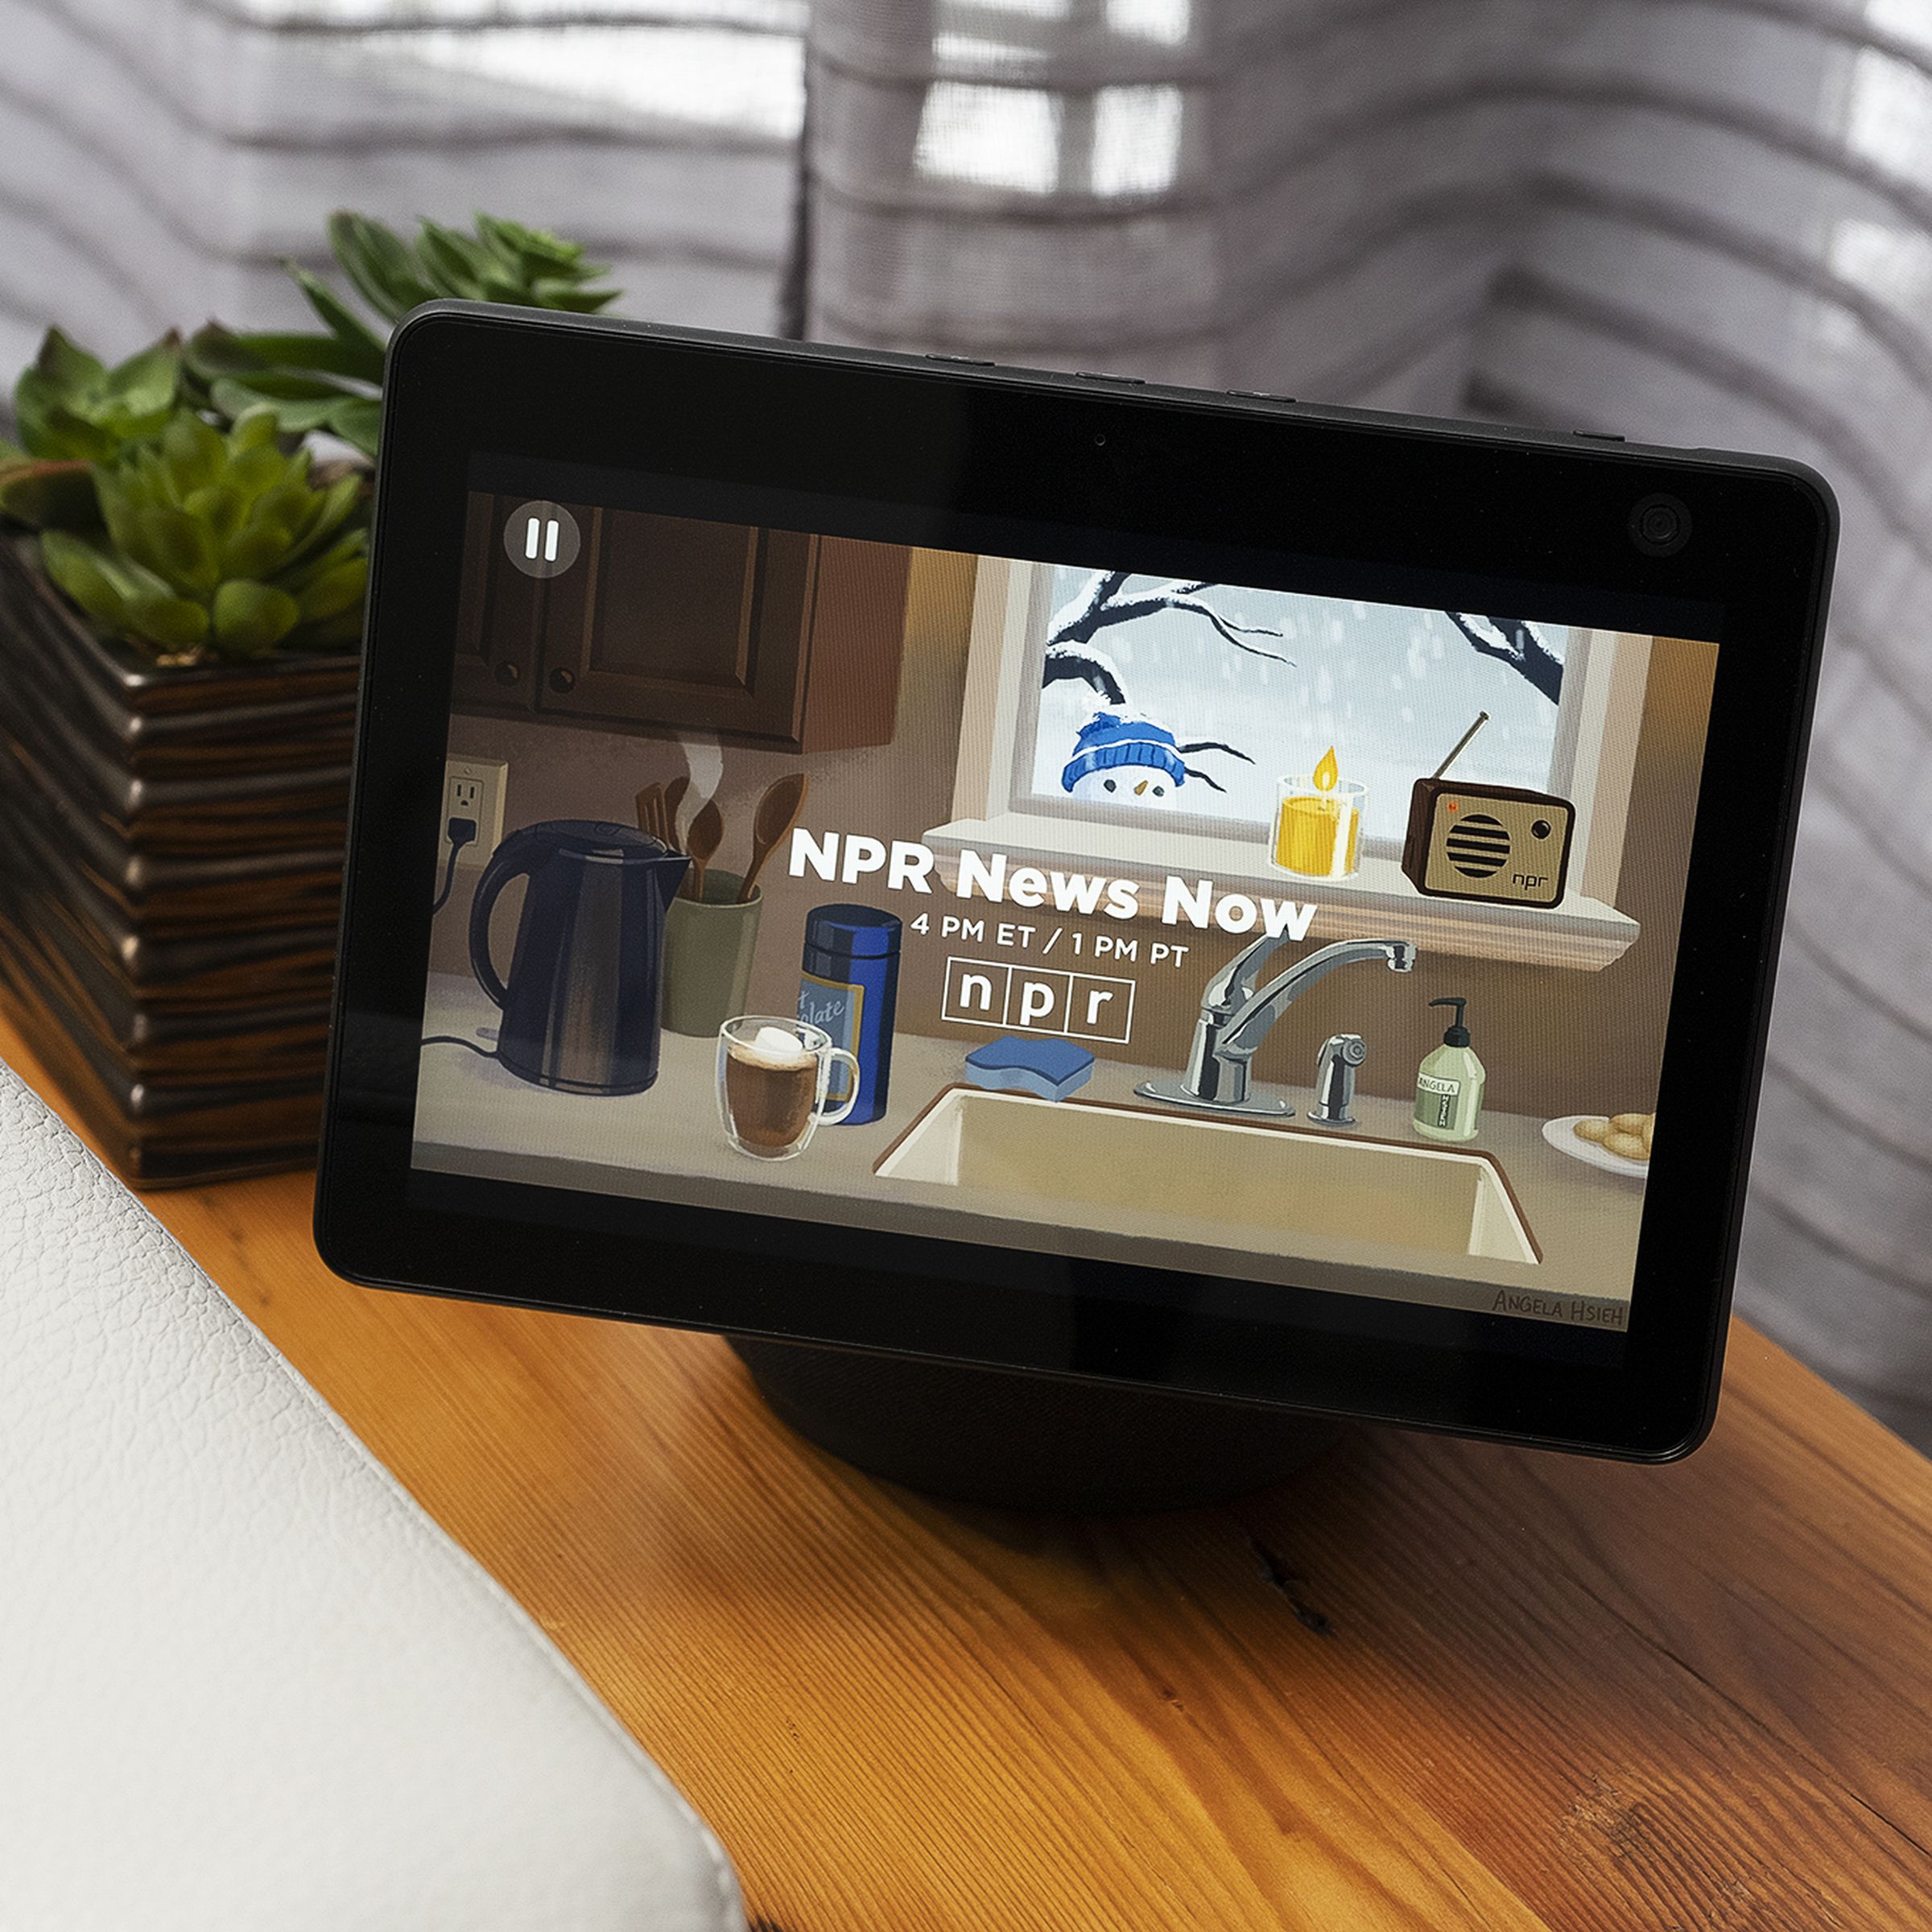 An Echo Show 10 device sitting on a piece of wood furniture beside a couch.